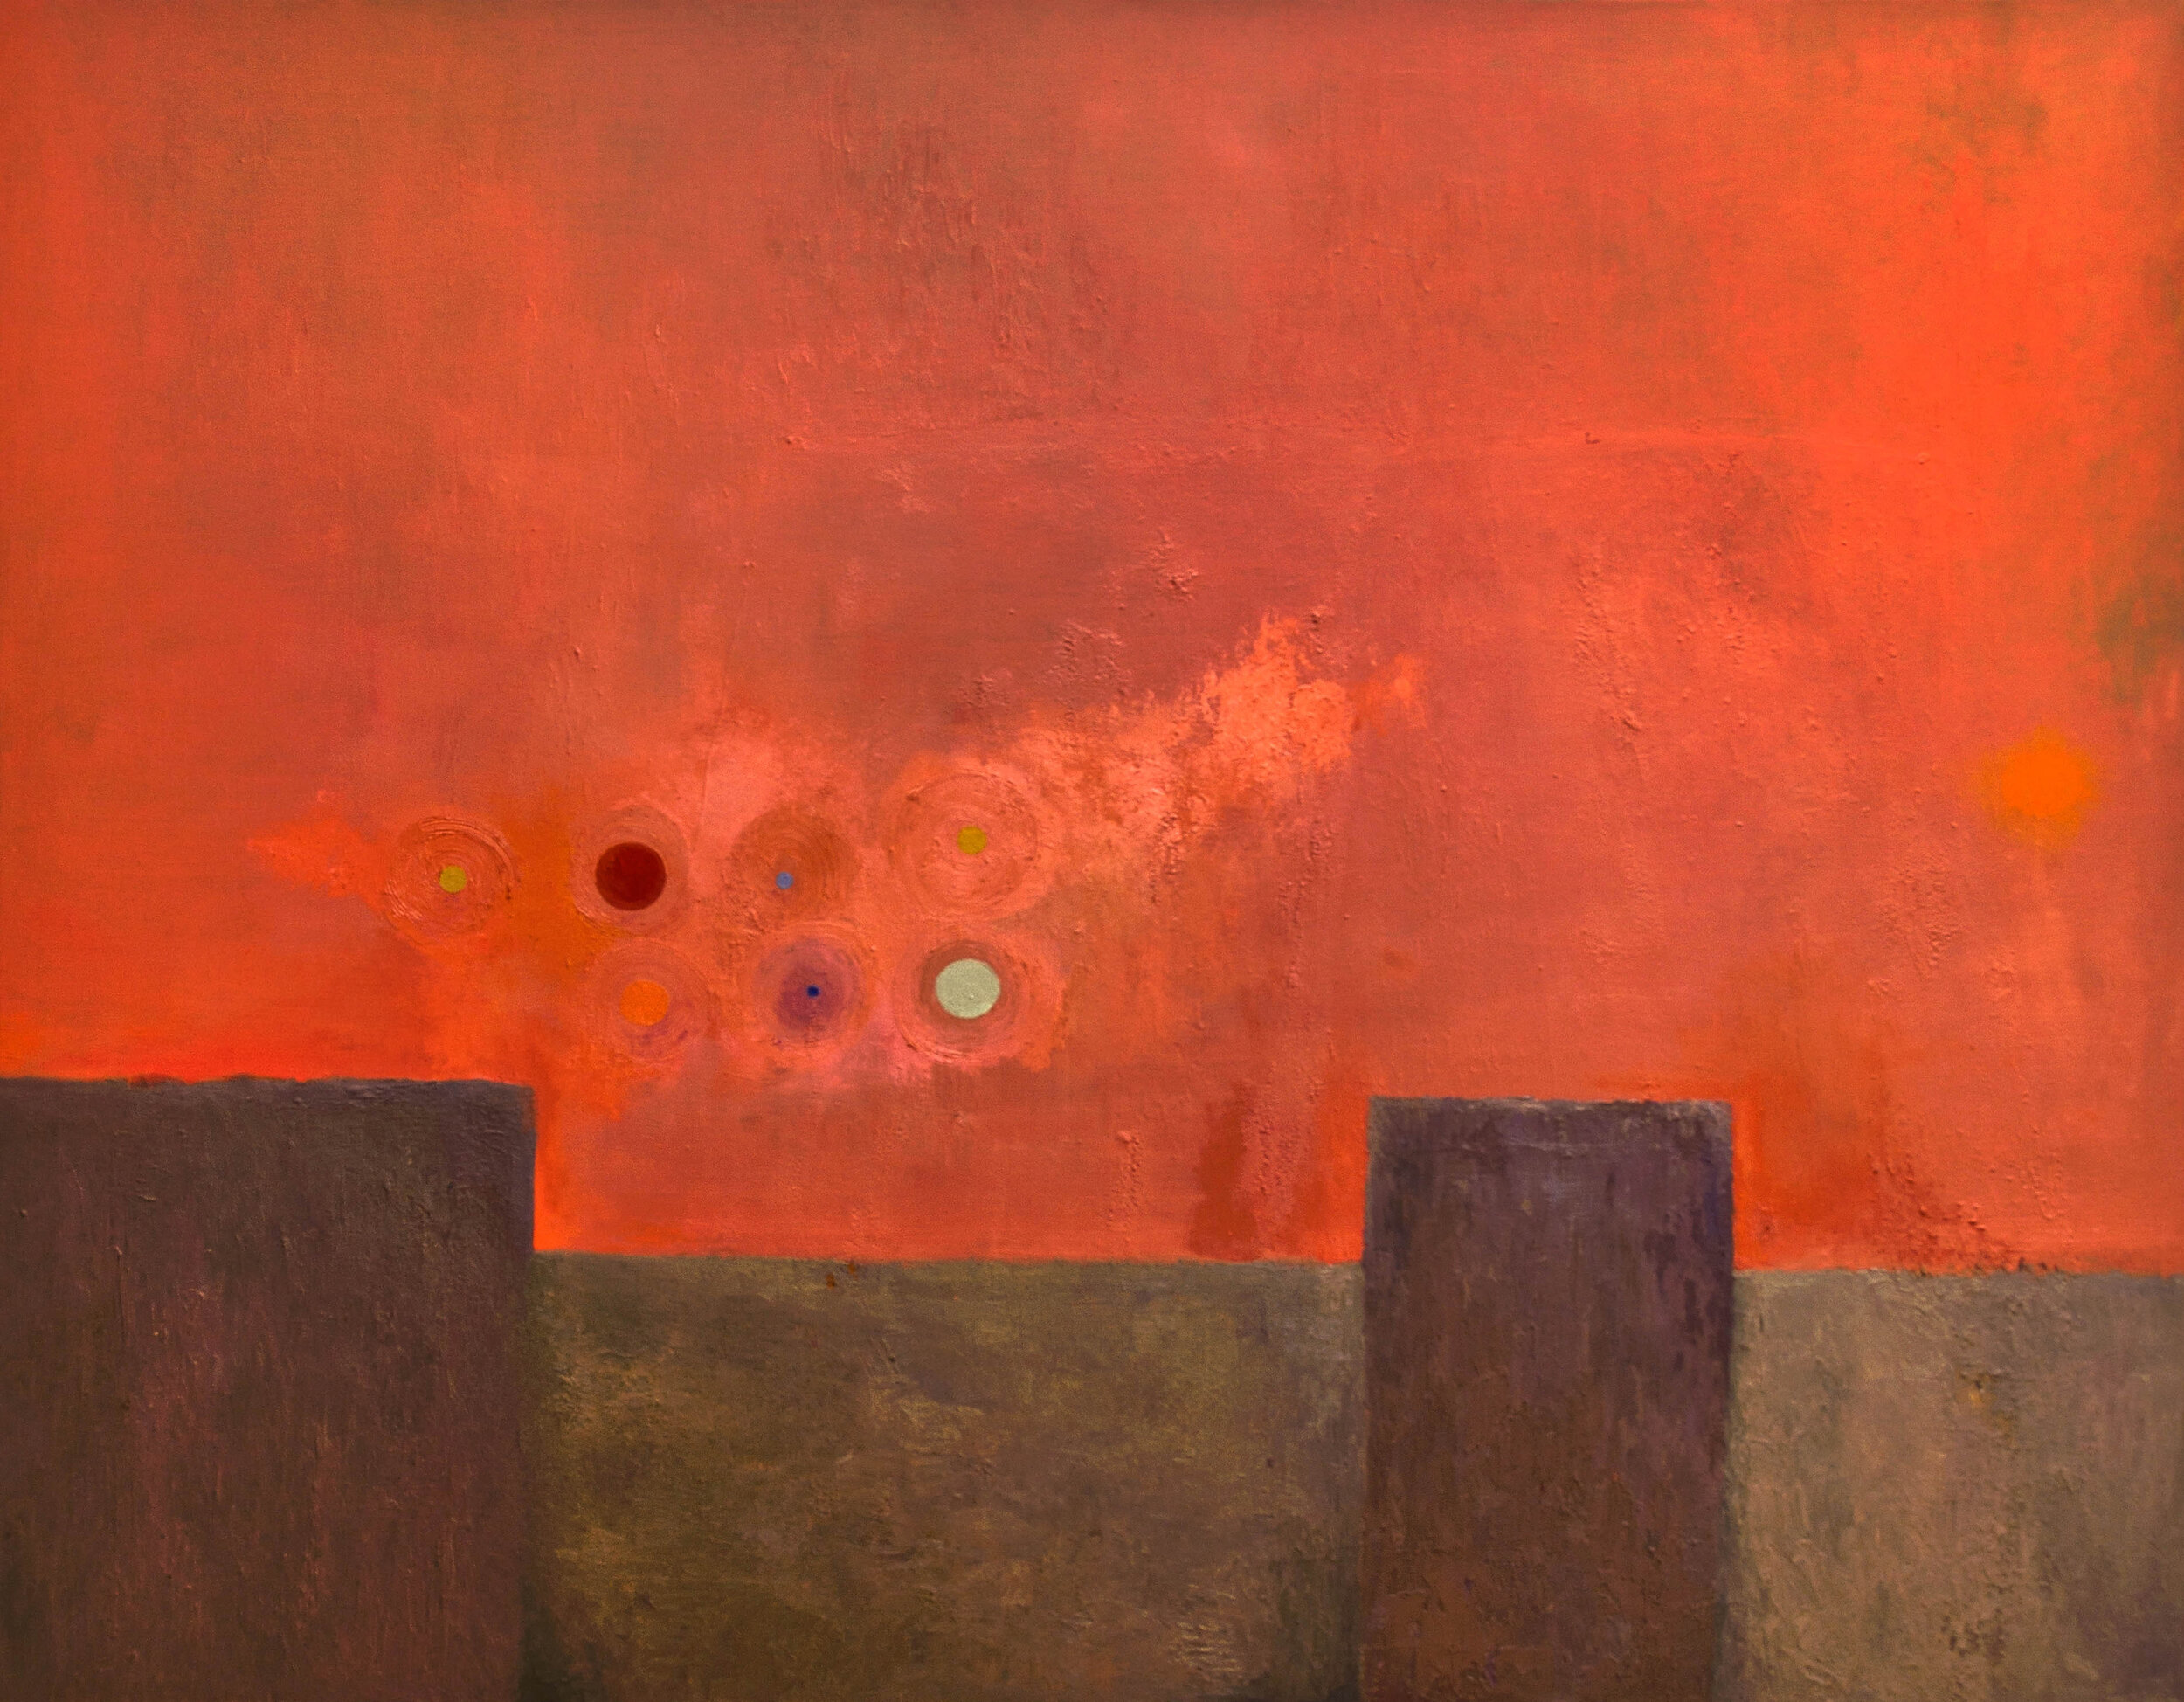 Untitled, 2012, Oil on Canvas, 48" x 60"